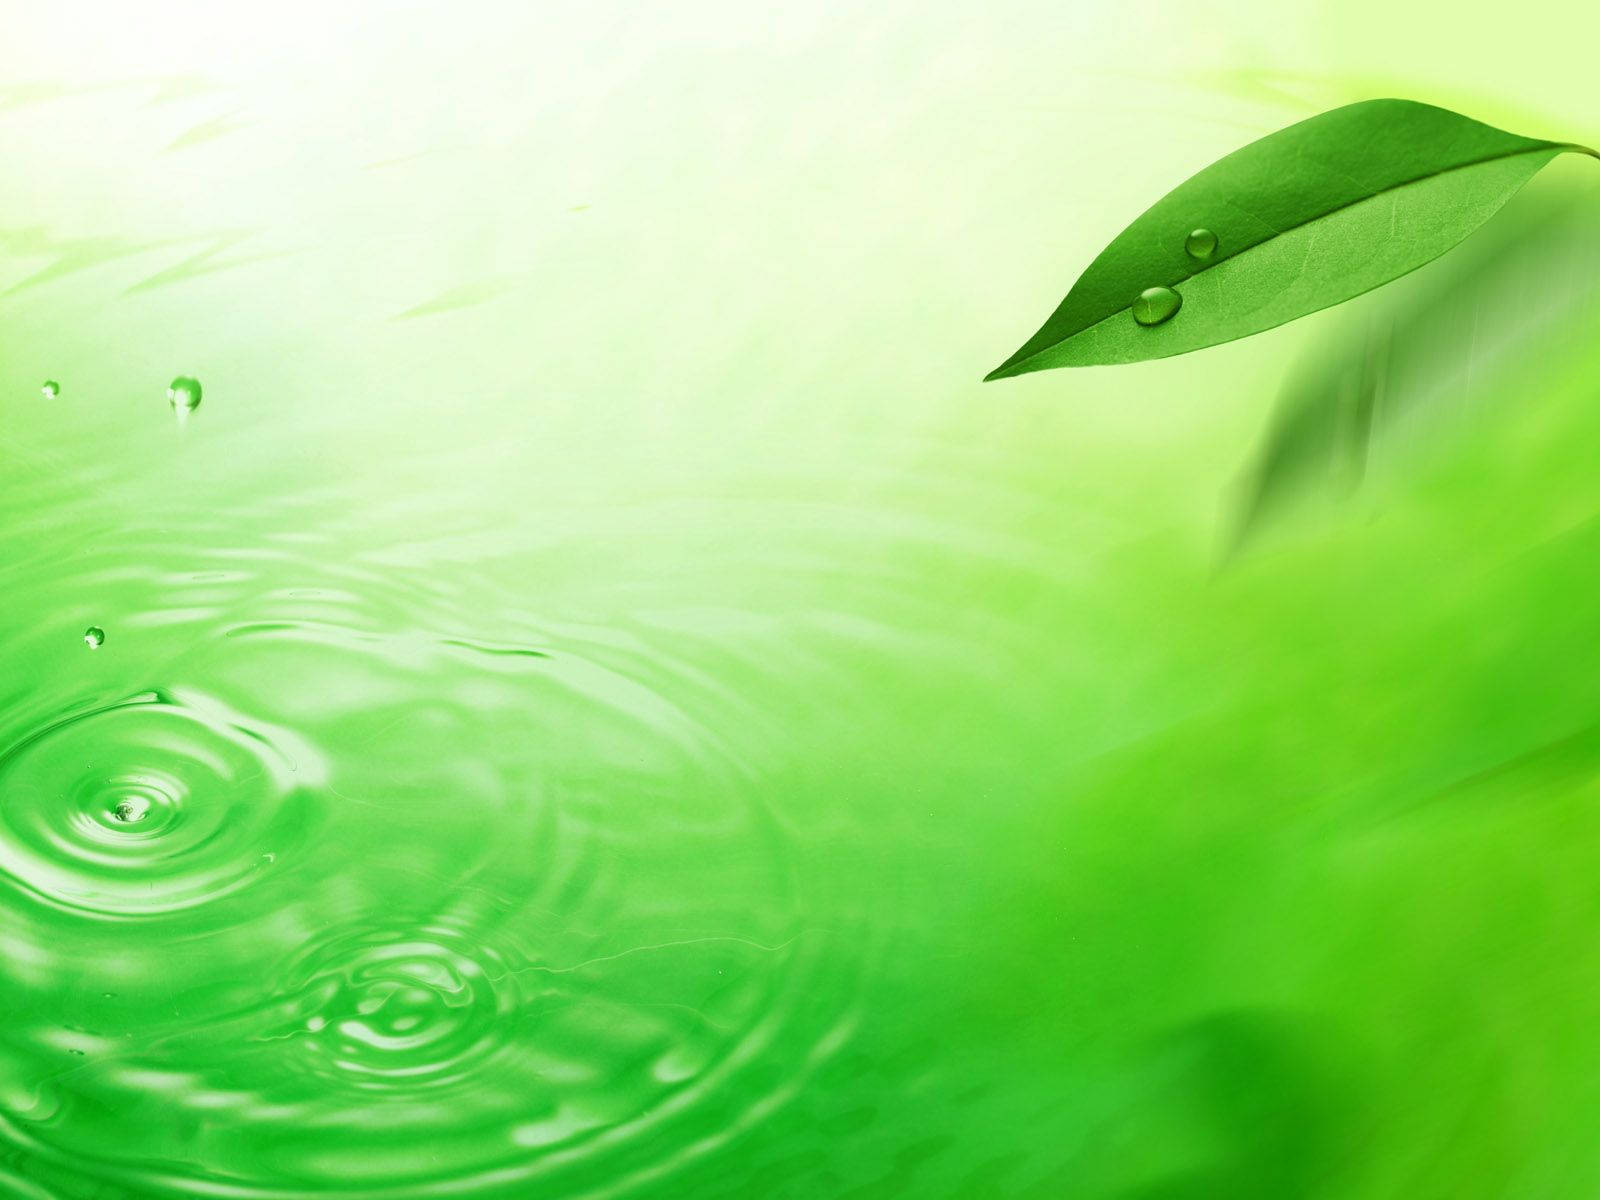 Take in the beauty of a leaf floating on the vibrant green waters. Wallpaper